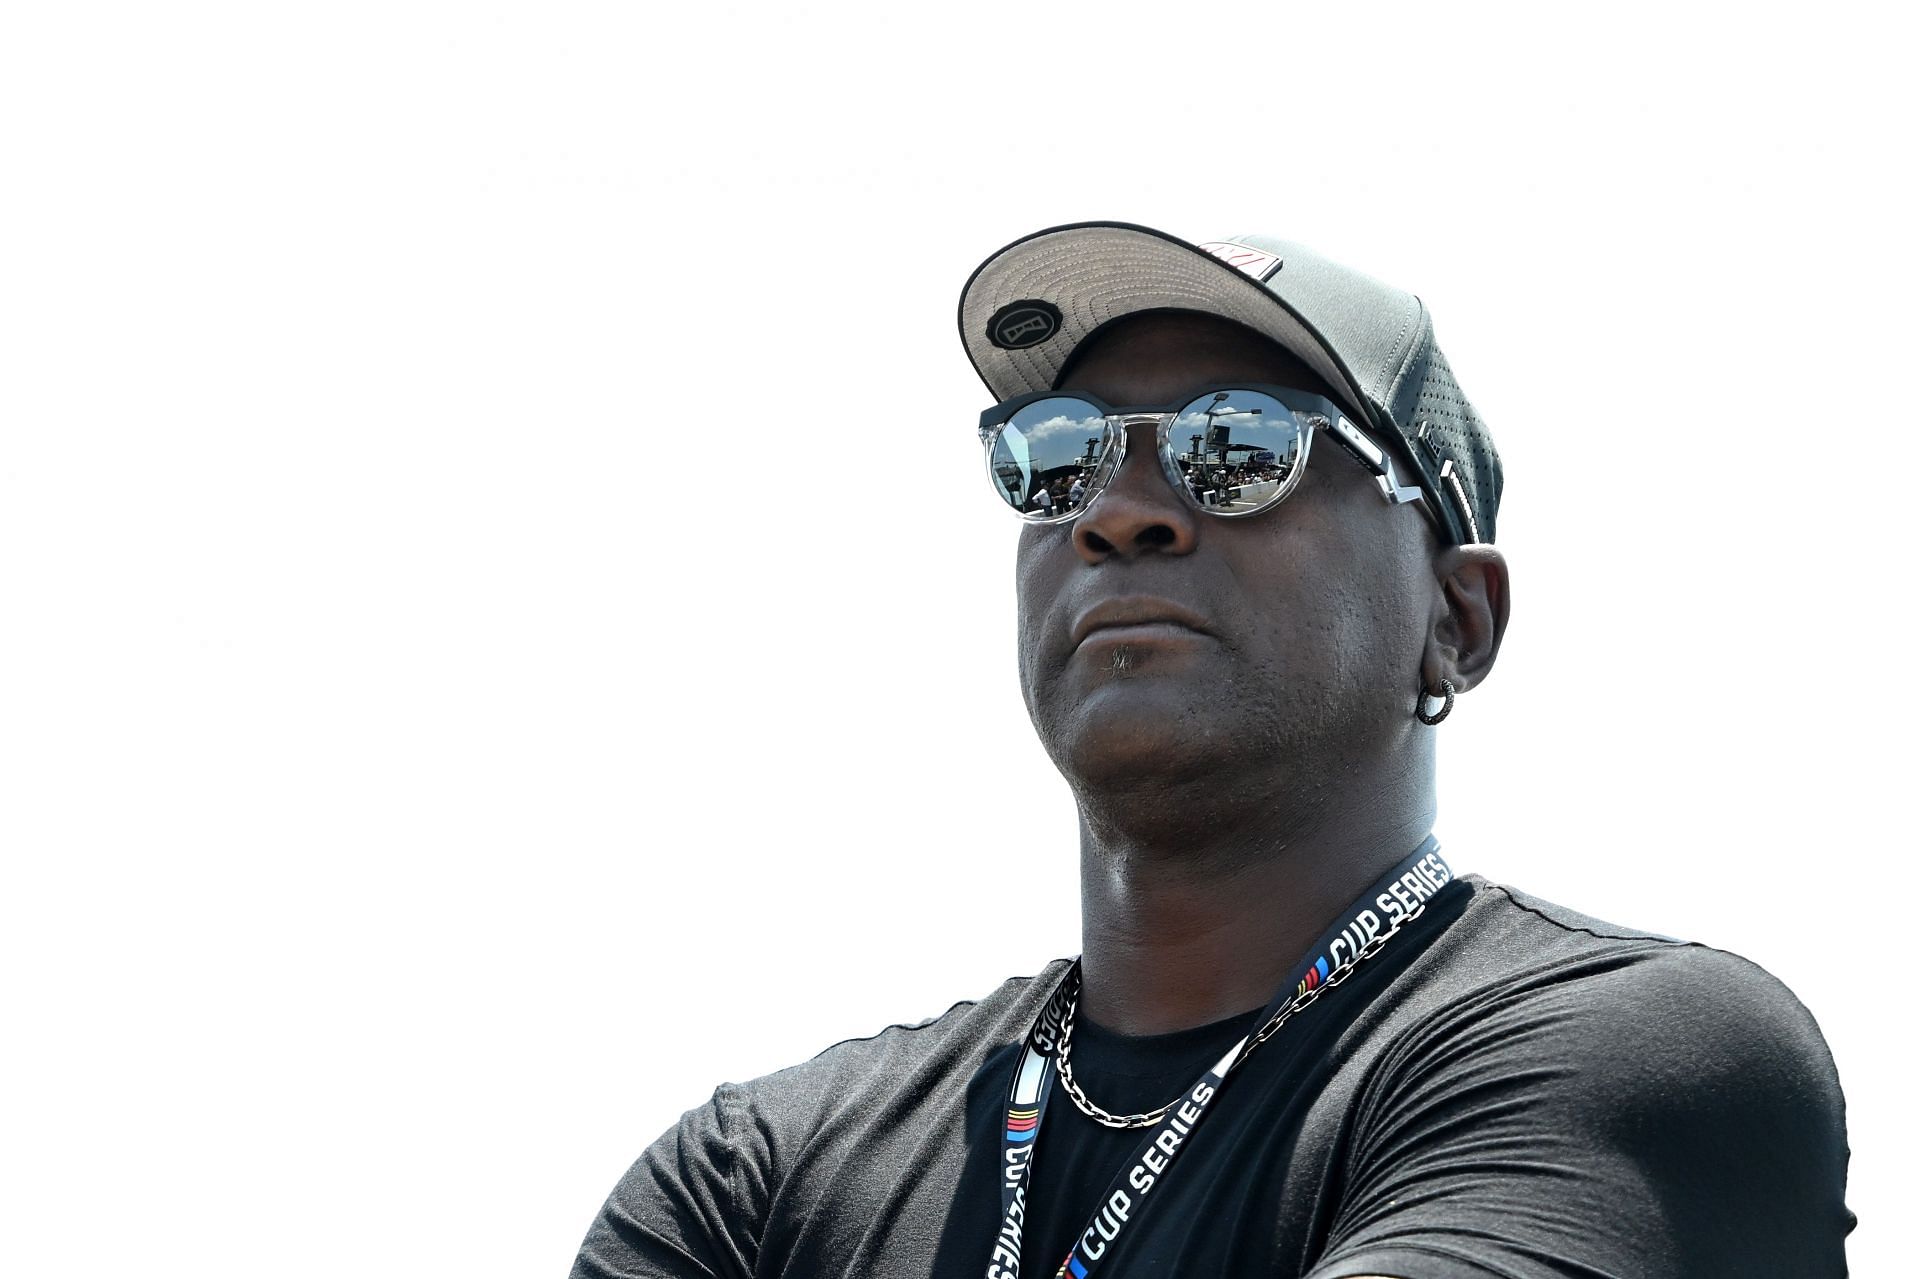 Michael Jordan at the NASCAR Cup Series Ally 400 - Qualifying